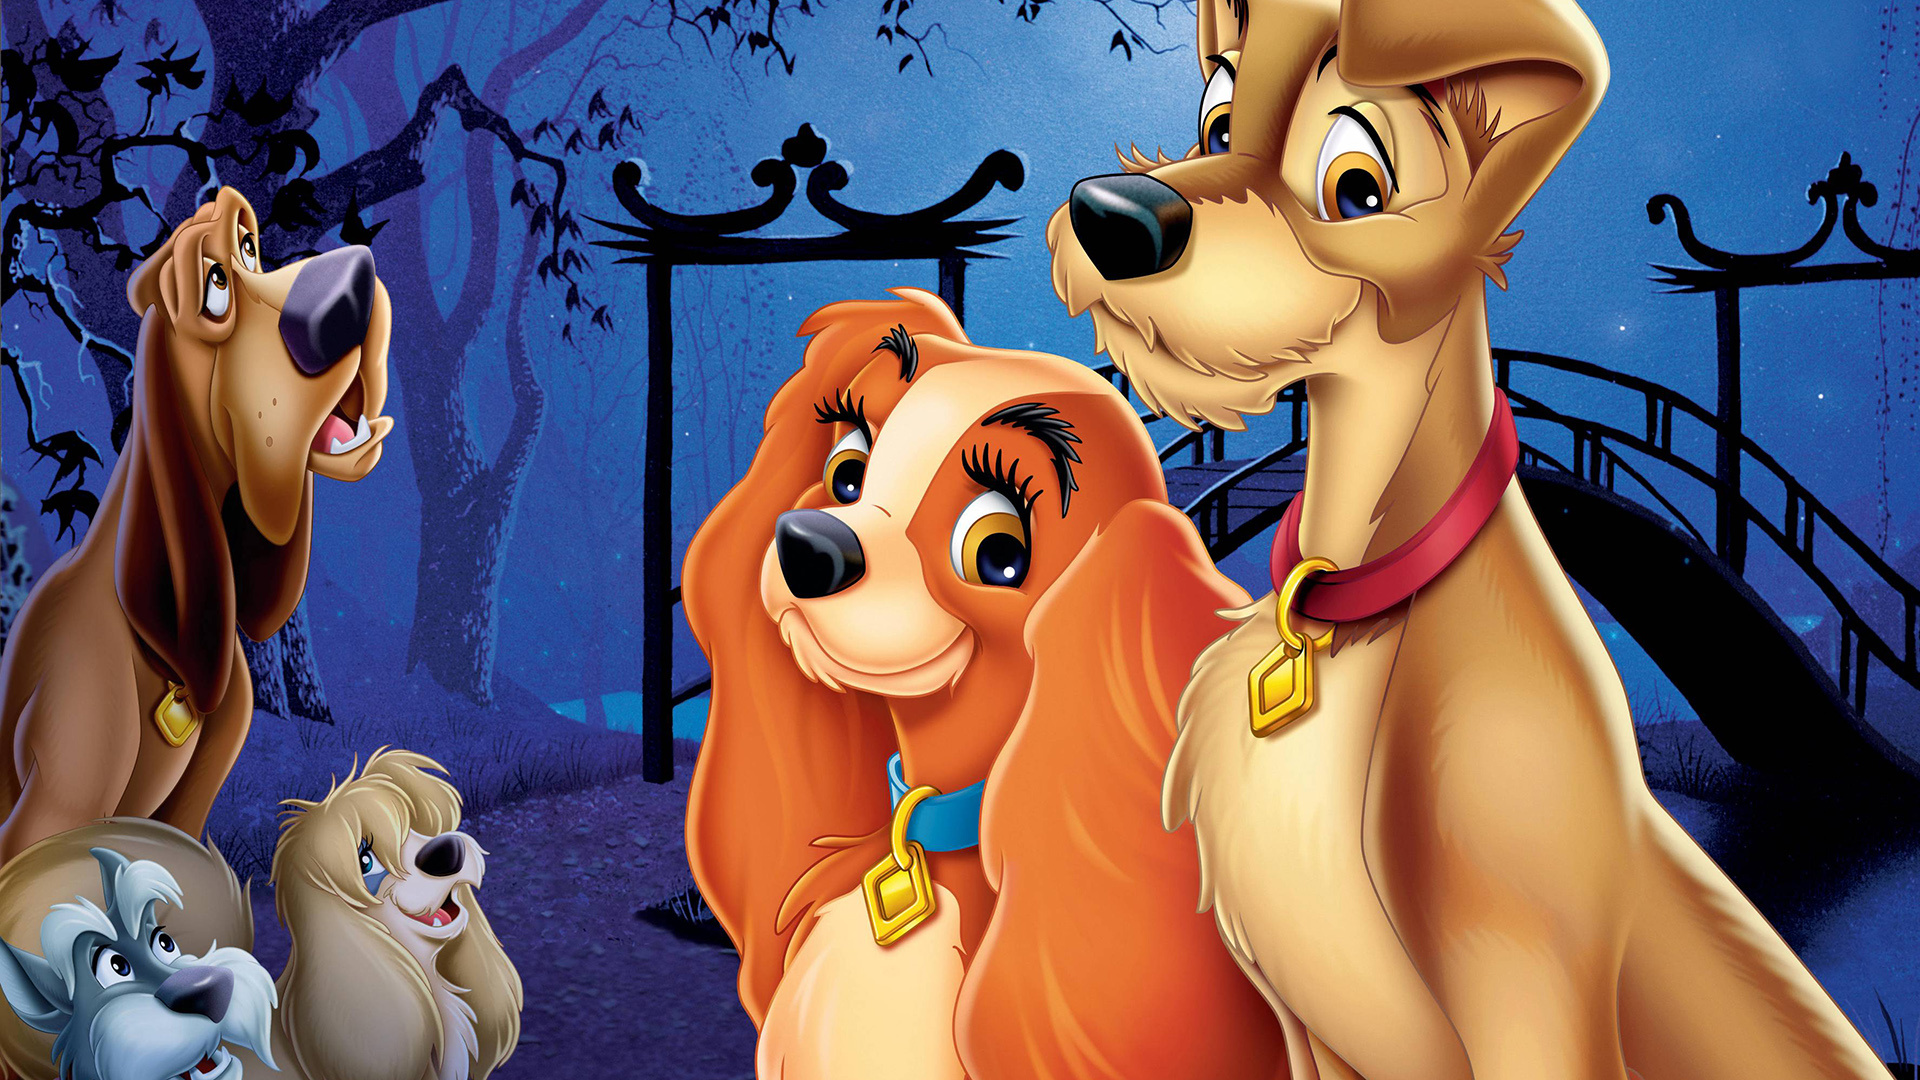 Lady and the Tramp, Animated masterpiece, Romantic wallpaper, Disney love story, 1920x1080 Full HD Desktop